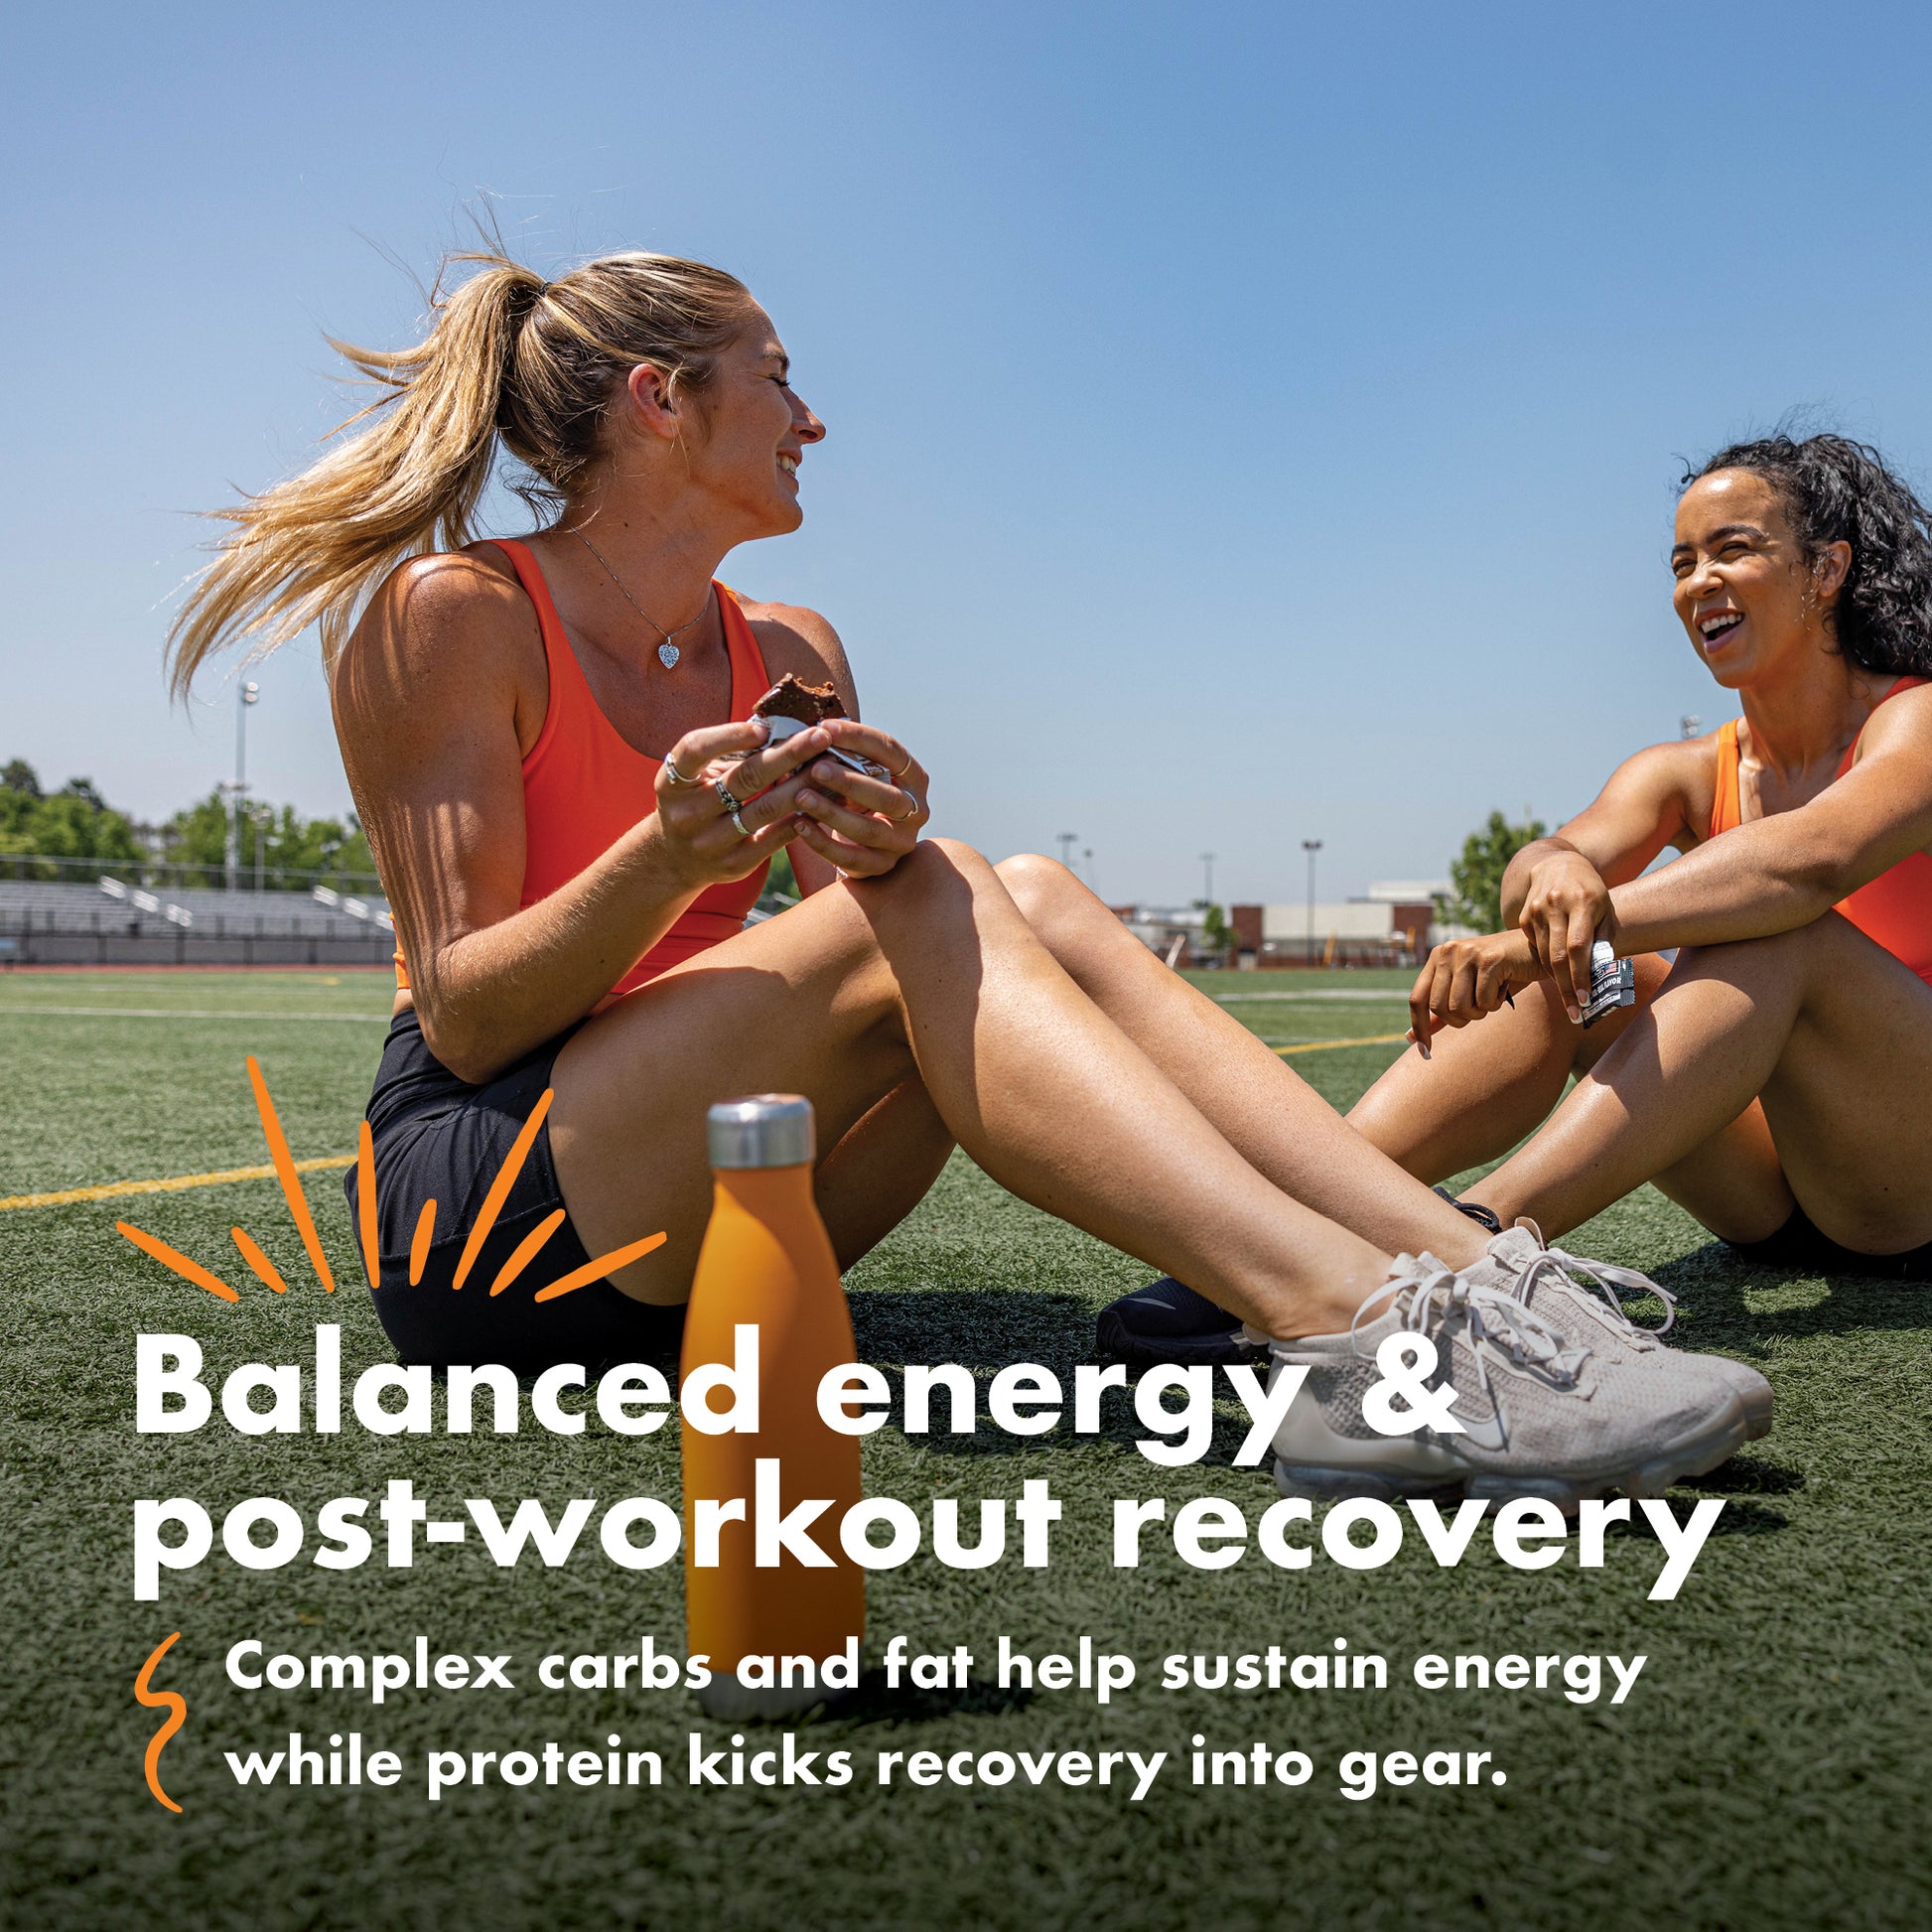 Plant Based Protein Bars - Balanced energy & post-workout recovery. Complex carbs and fat help sustain energy while protein kick recovery into gear.